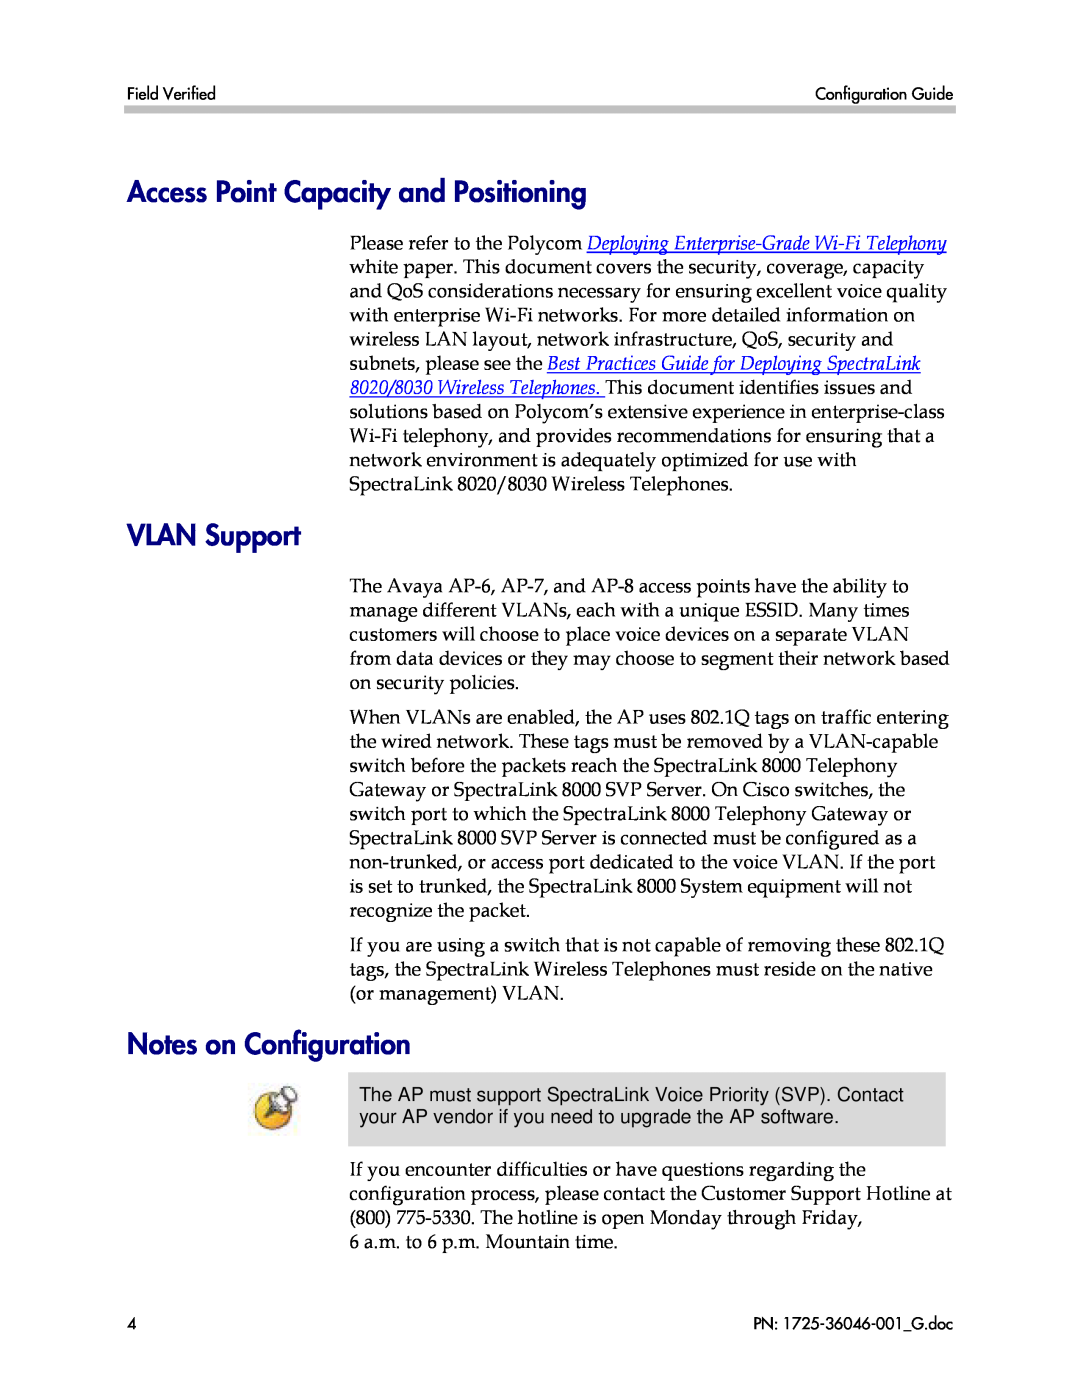 Polycom AP-8, AP-7, AP-6 manual Access Point Capacity and Positioning, VLAN Support, Notes on Configuration 